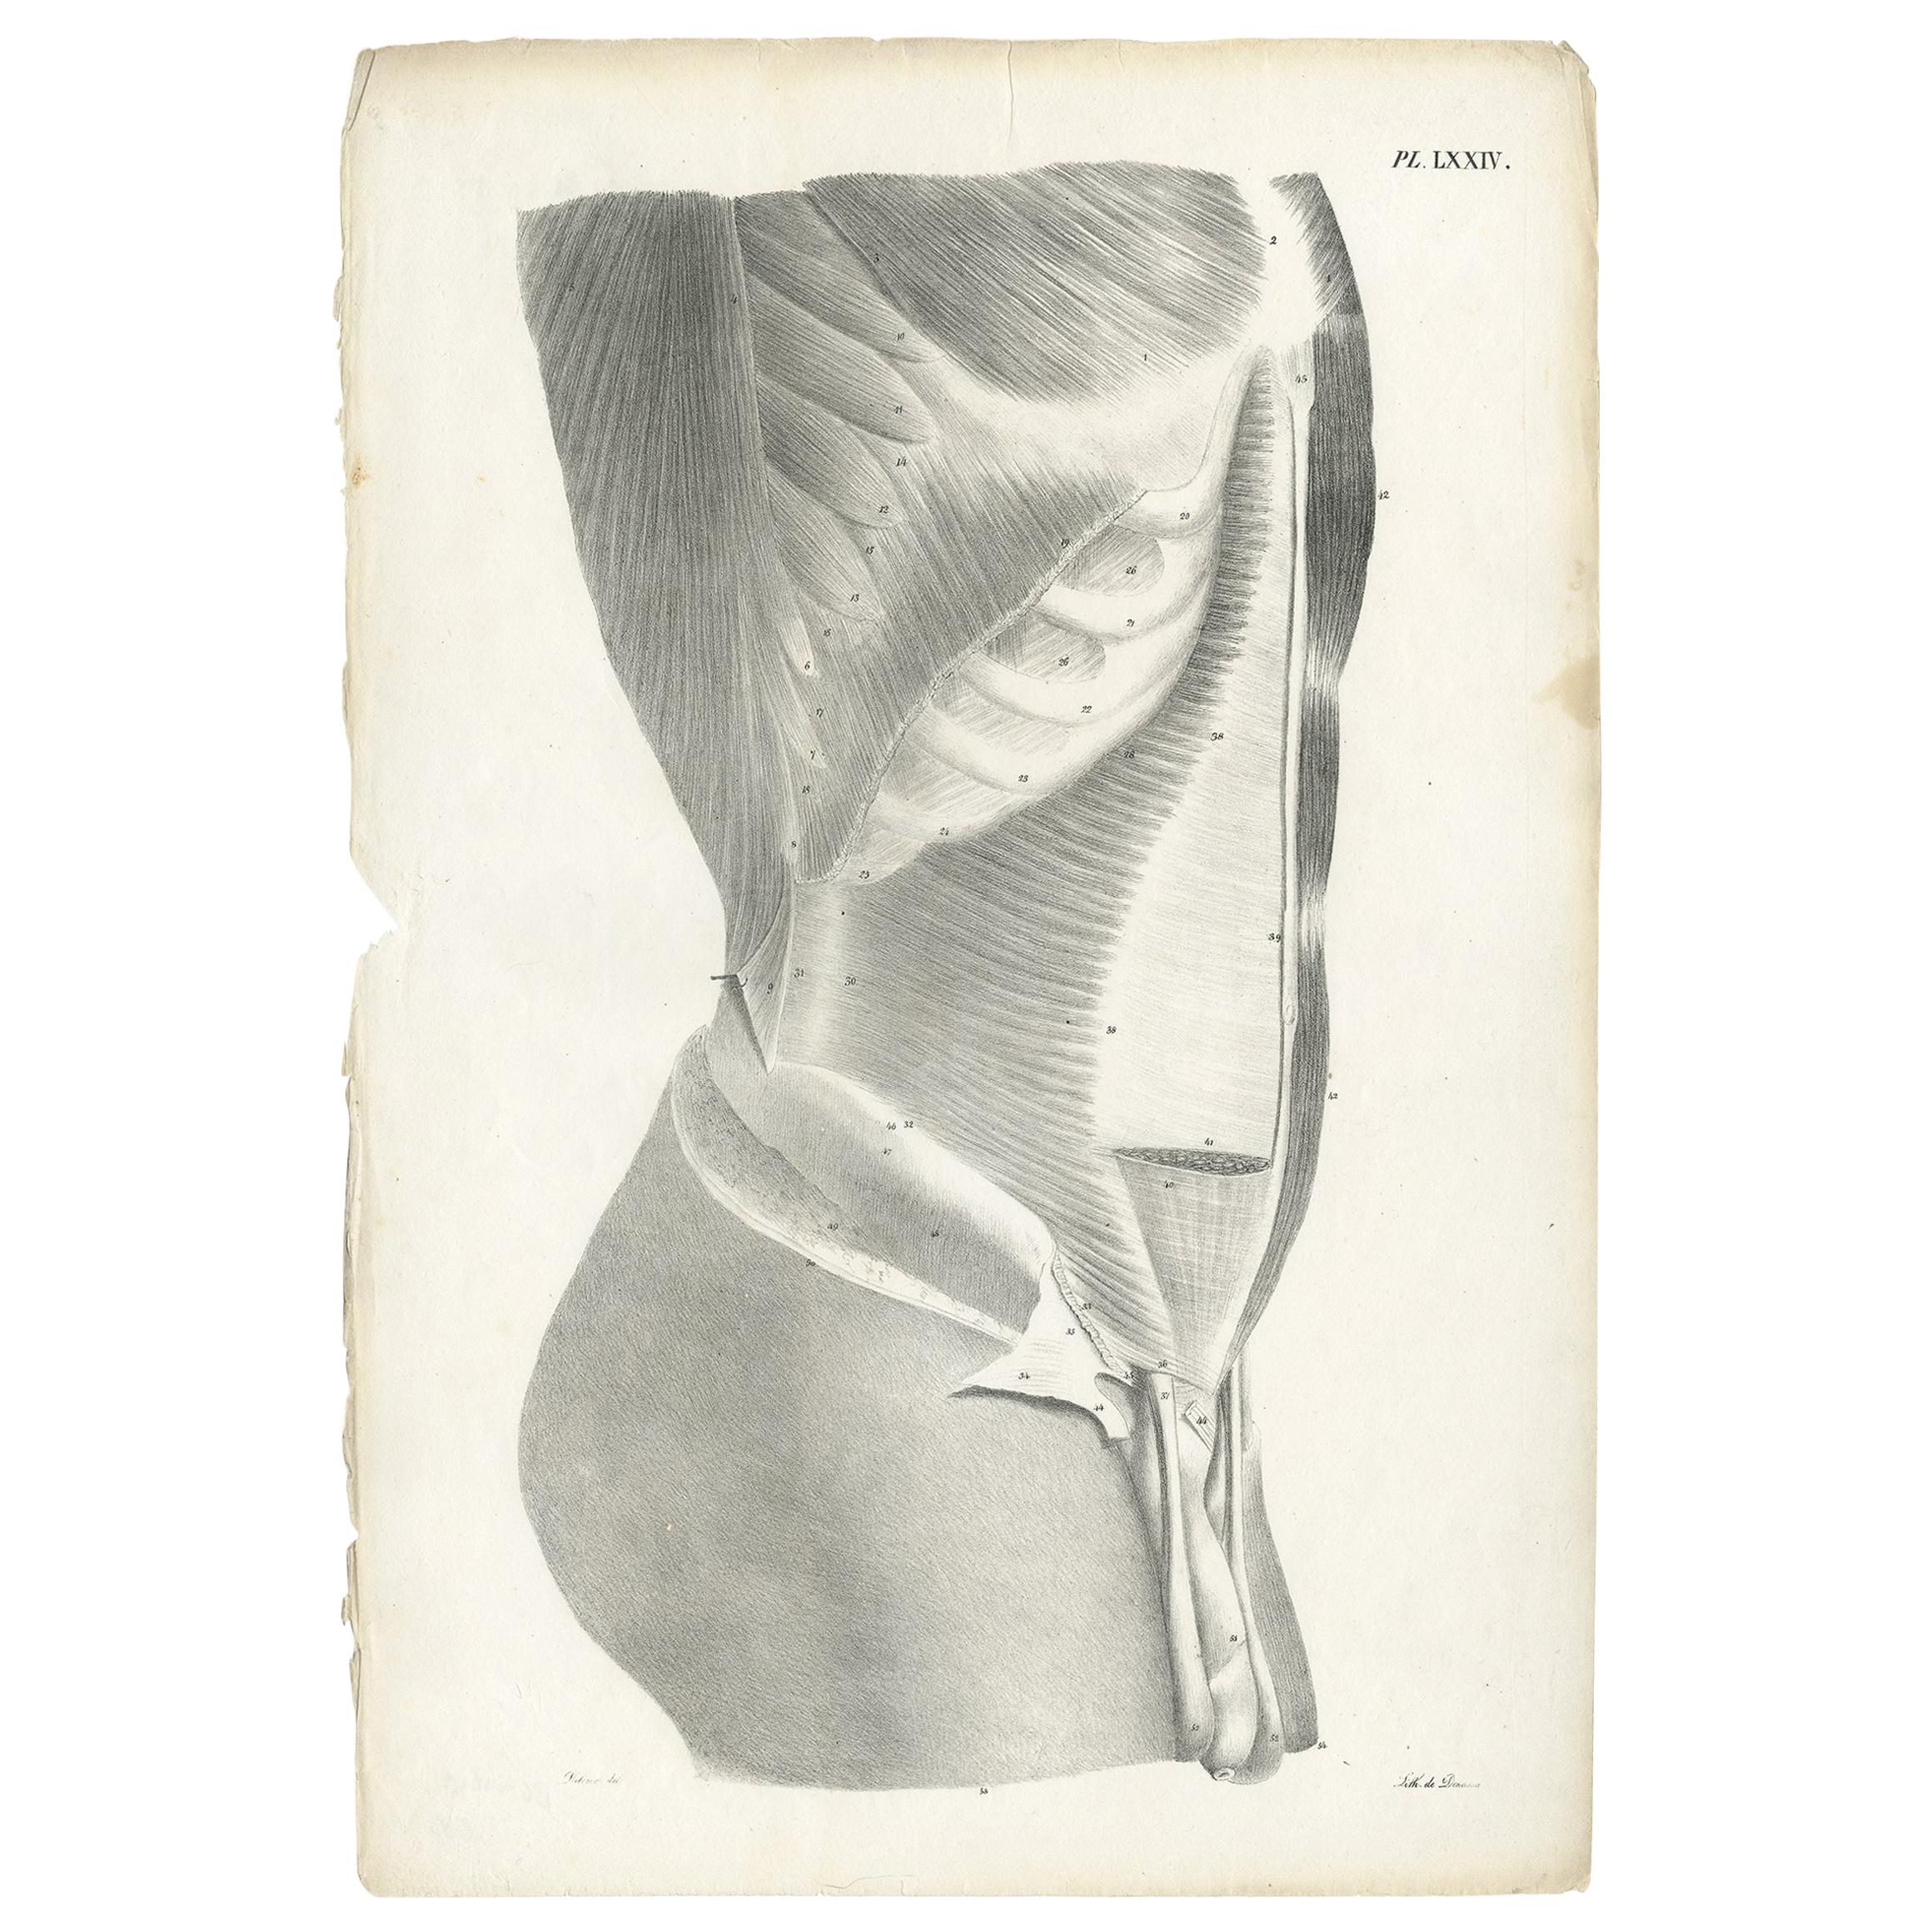 Pl. LXXIV Antique Anatomy / Medical Print of the Male Torso by Cloquet, '1821'